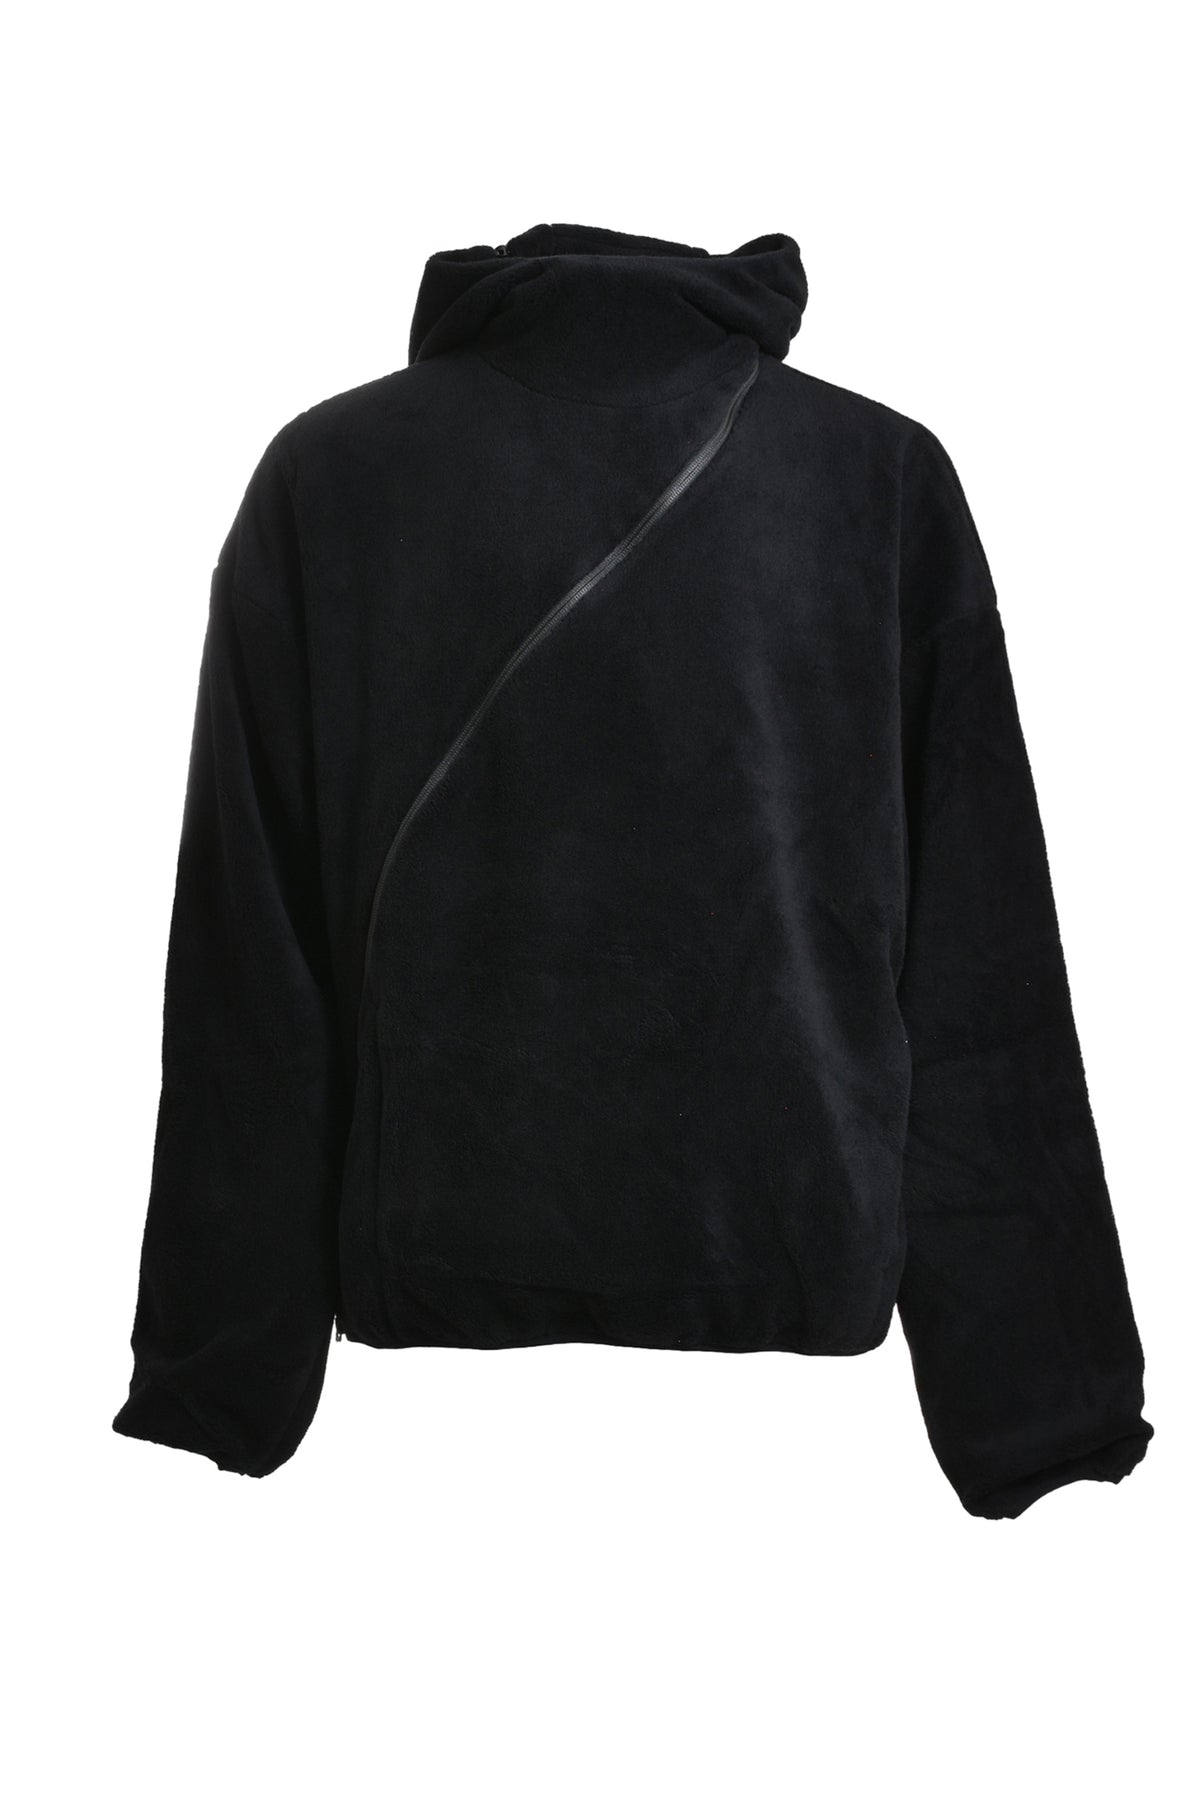 POST ARCHIVE FACTION (PAF) 5.1 HOODIE CENTER / BLK